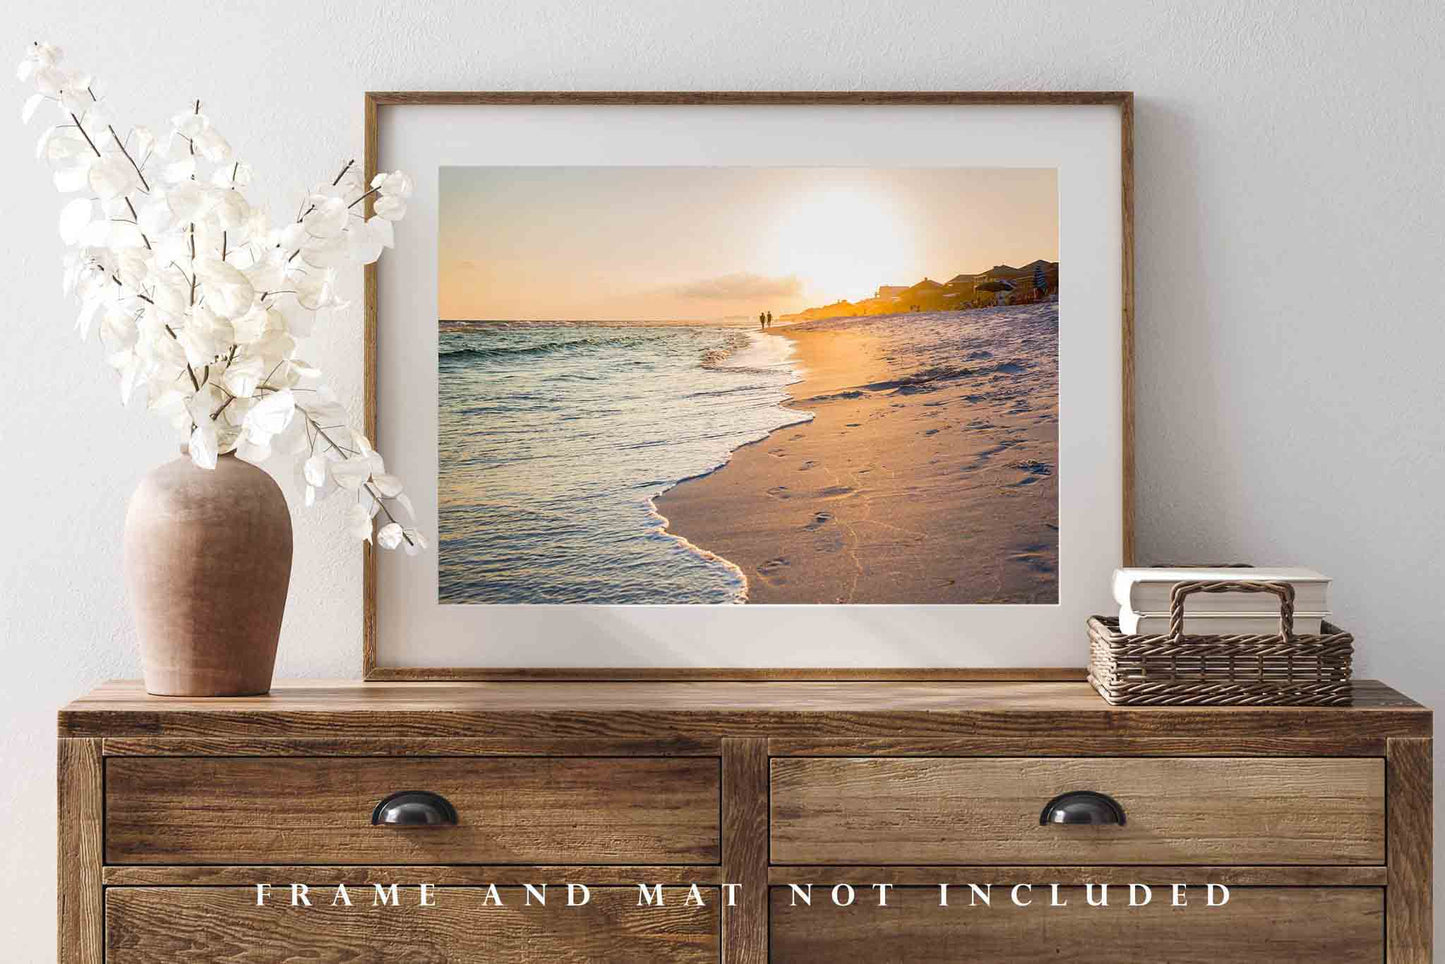 Coastal Photography Print - Wall Art Picture of People Walking Along Beach Leaving Footprints in Sand in Destin Florida Gulf Coast Decor